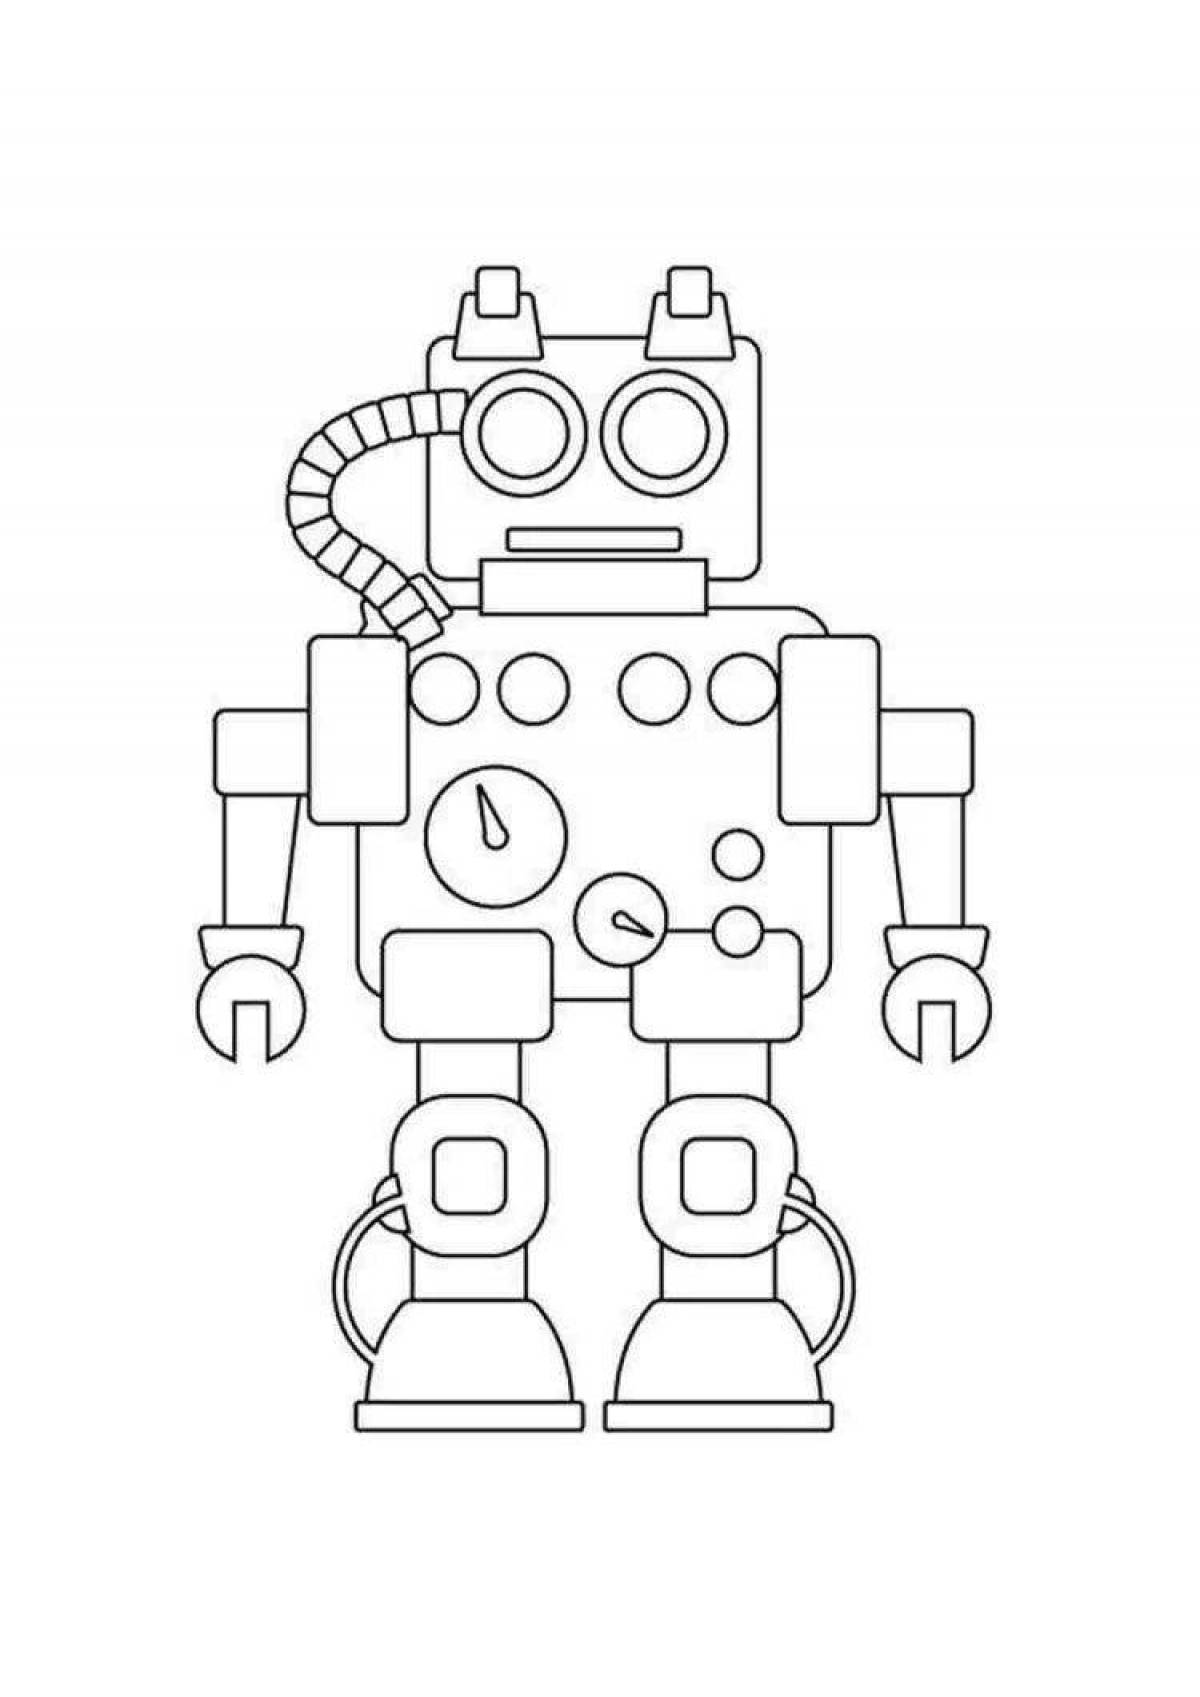 Colorful robot sun coloring page